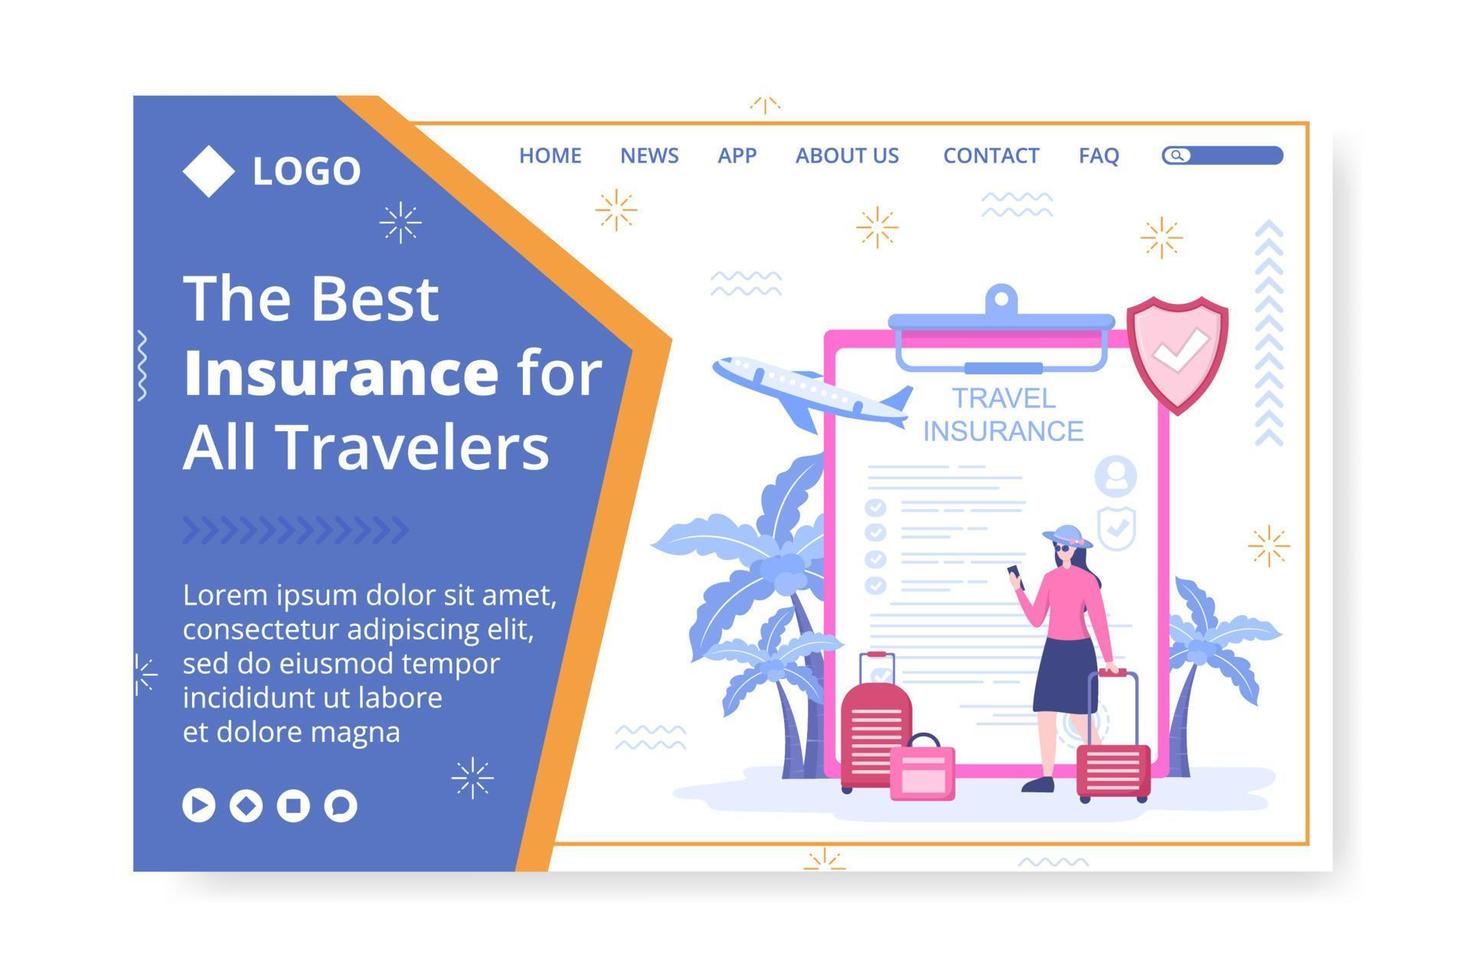 Travel Insurance Landing Page Template Flat Design Illustration Editable of Square Background Suitable for Social media, Greeting Card and Web Internet Ads vector